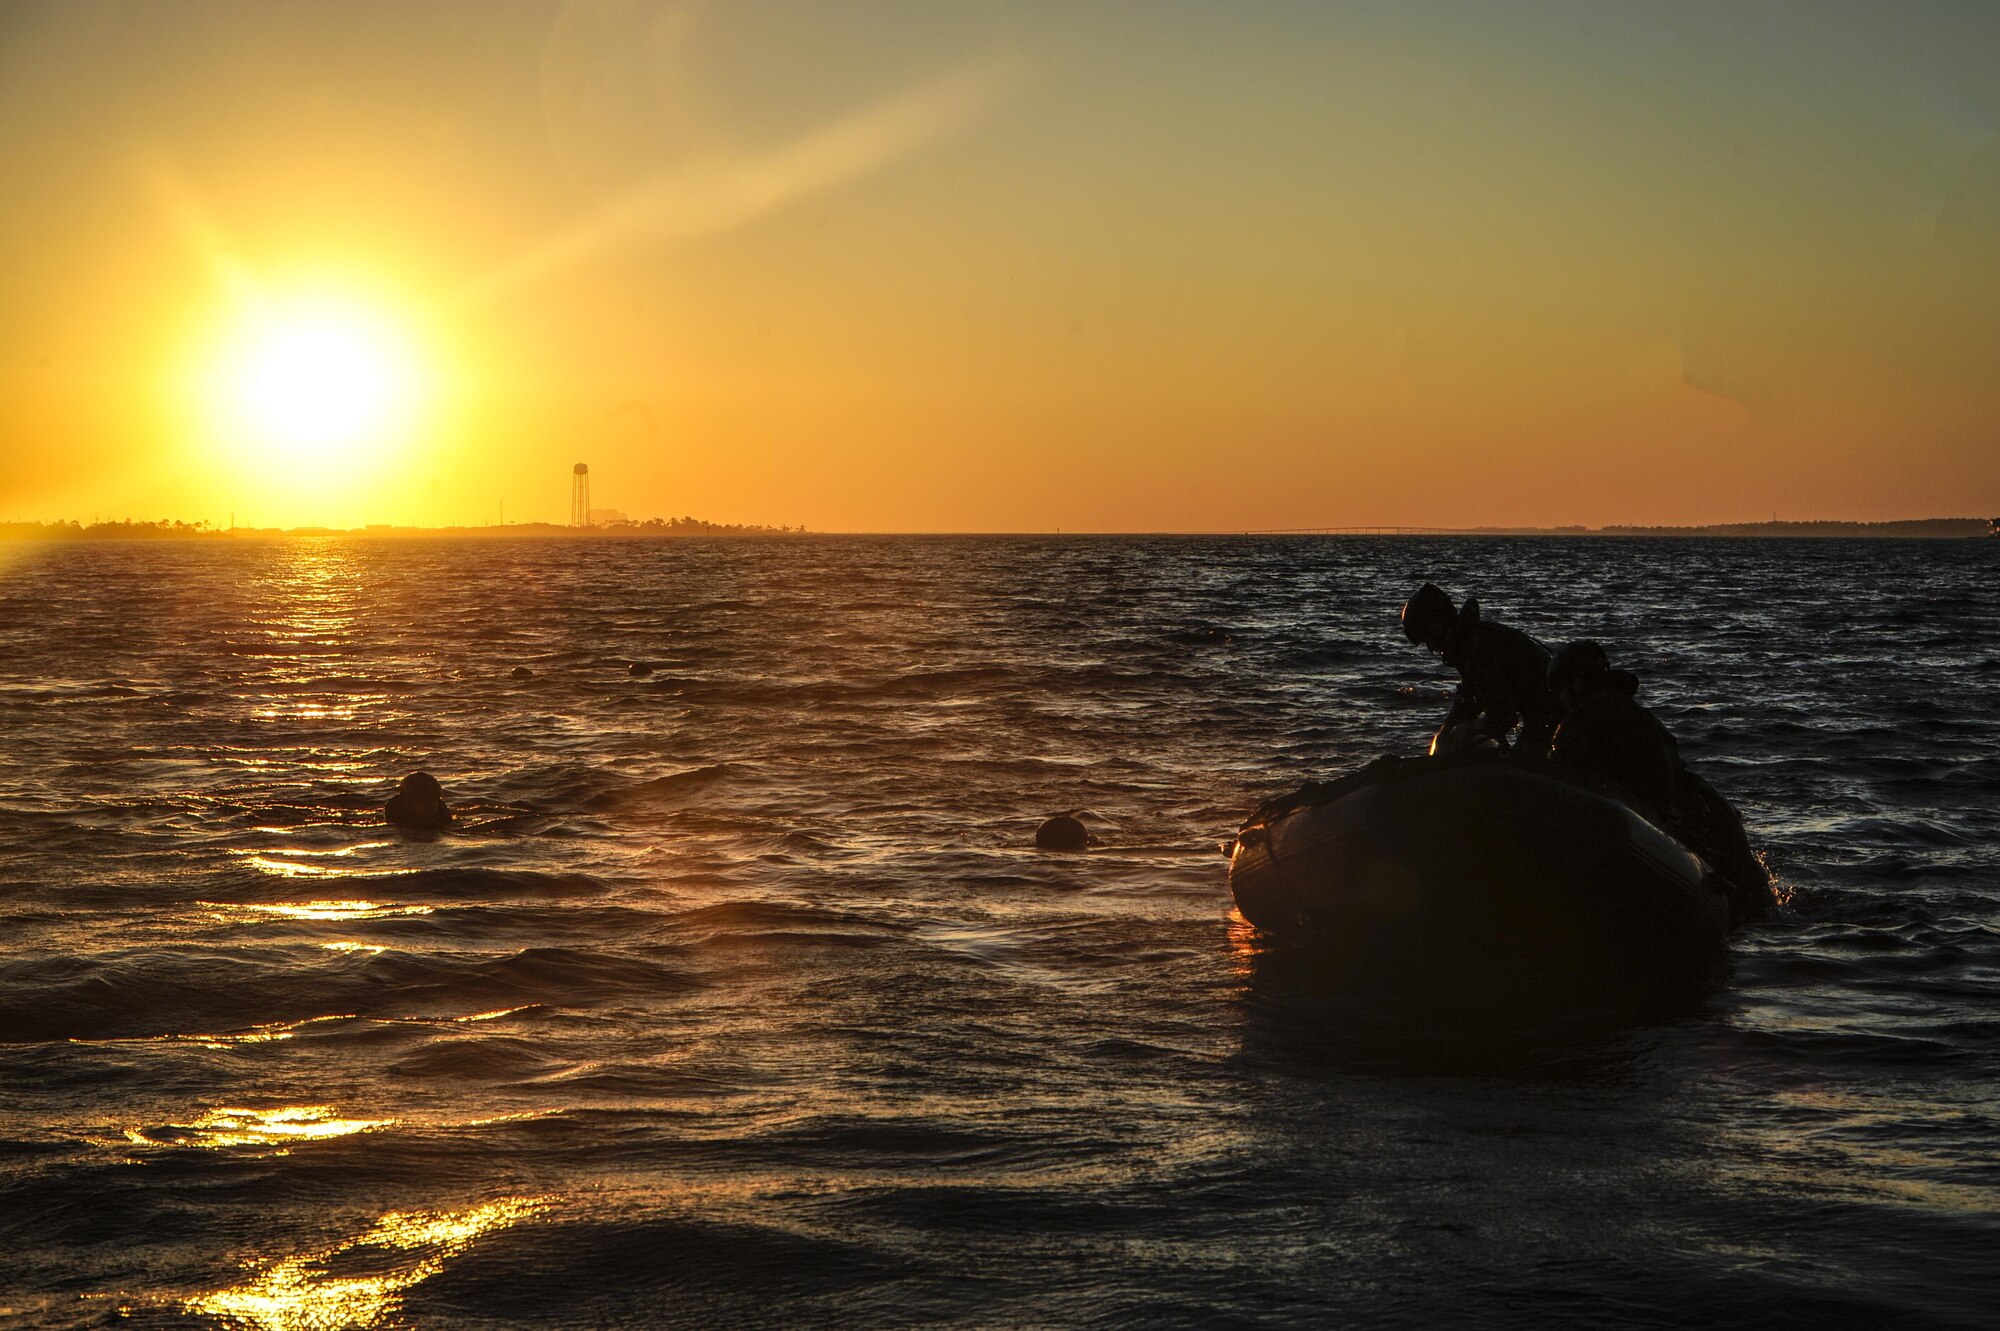 Marine Raiders with the Marine Corp Special Operations Command perform helocast training with the 160th Special Operations Aviation Regiment out of Fort Campbell, Kentucky, at Hurlburt Field, Fla., Oct. 29, 2015. The Raiders spent a week at Hurlburt Field to perform specialized training. (U.S. Air Force photo by Senior Airman Christopher Callaway) 